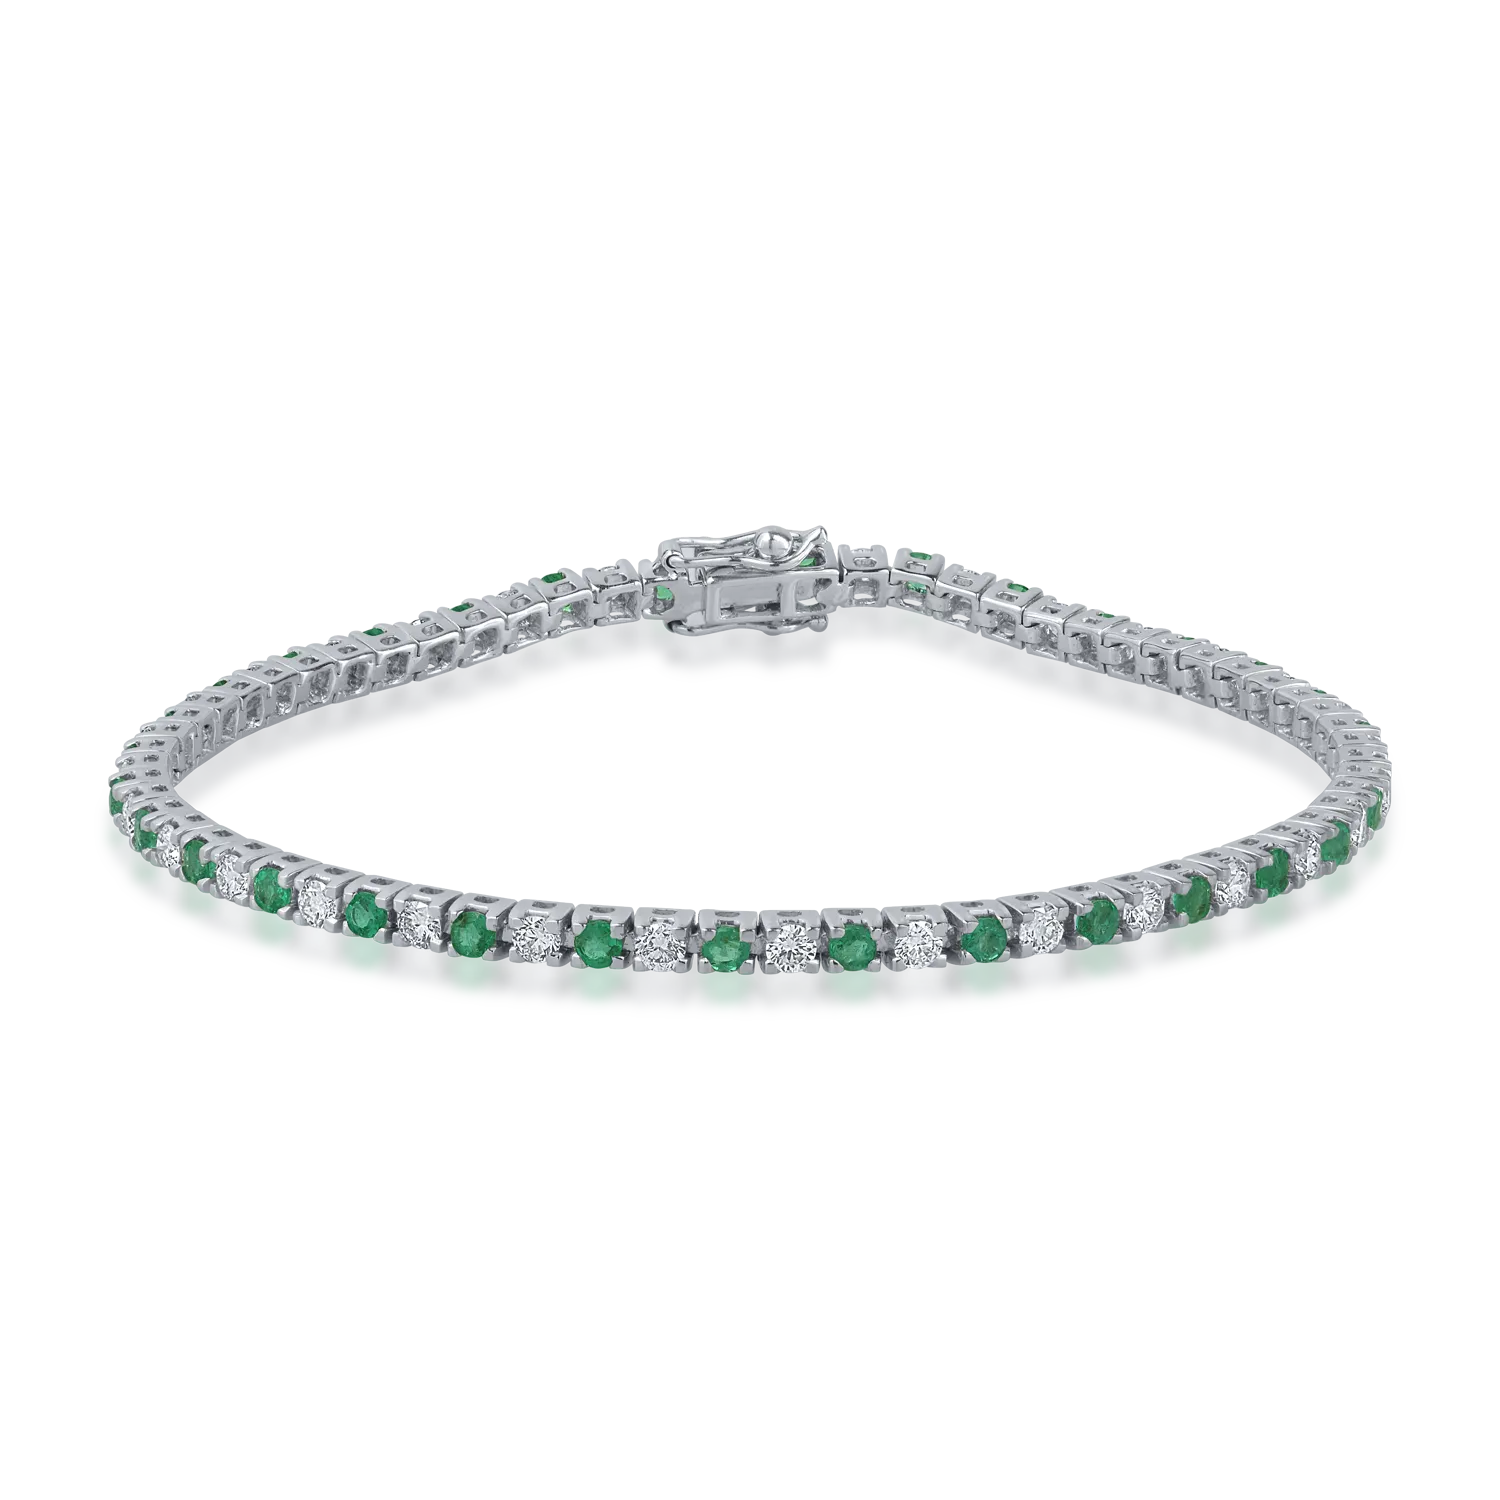 White gold tennis bracelet with 1.85ct diamonds and 1.71ct emeralds